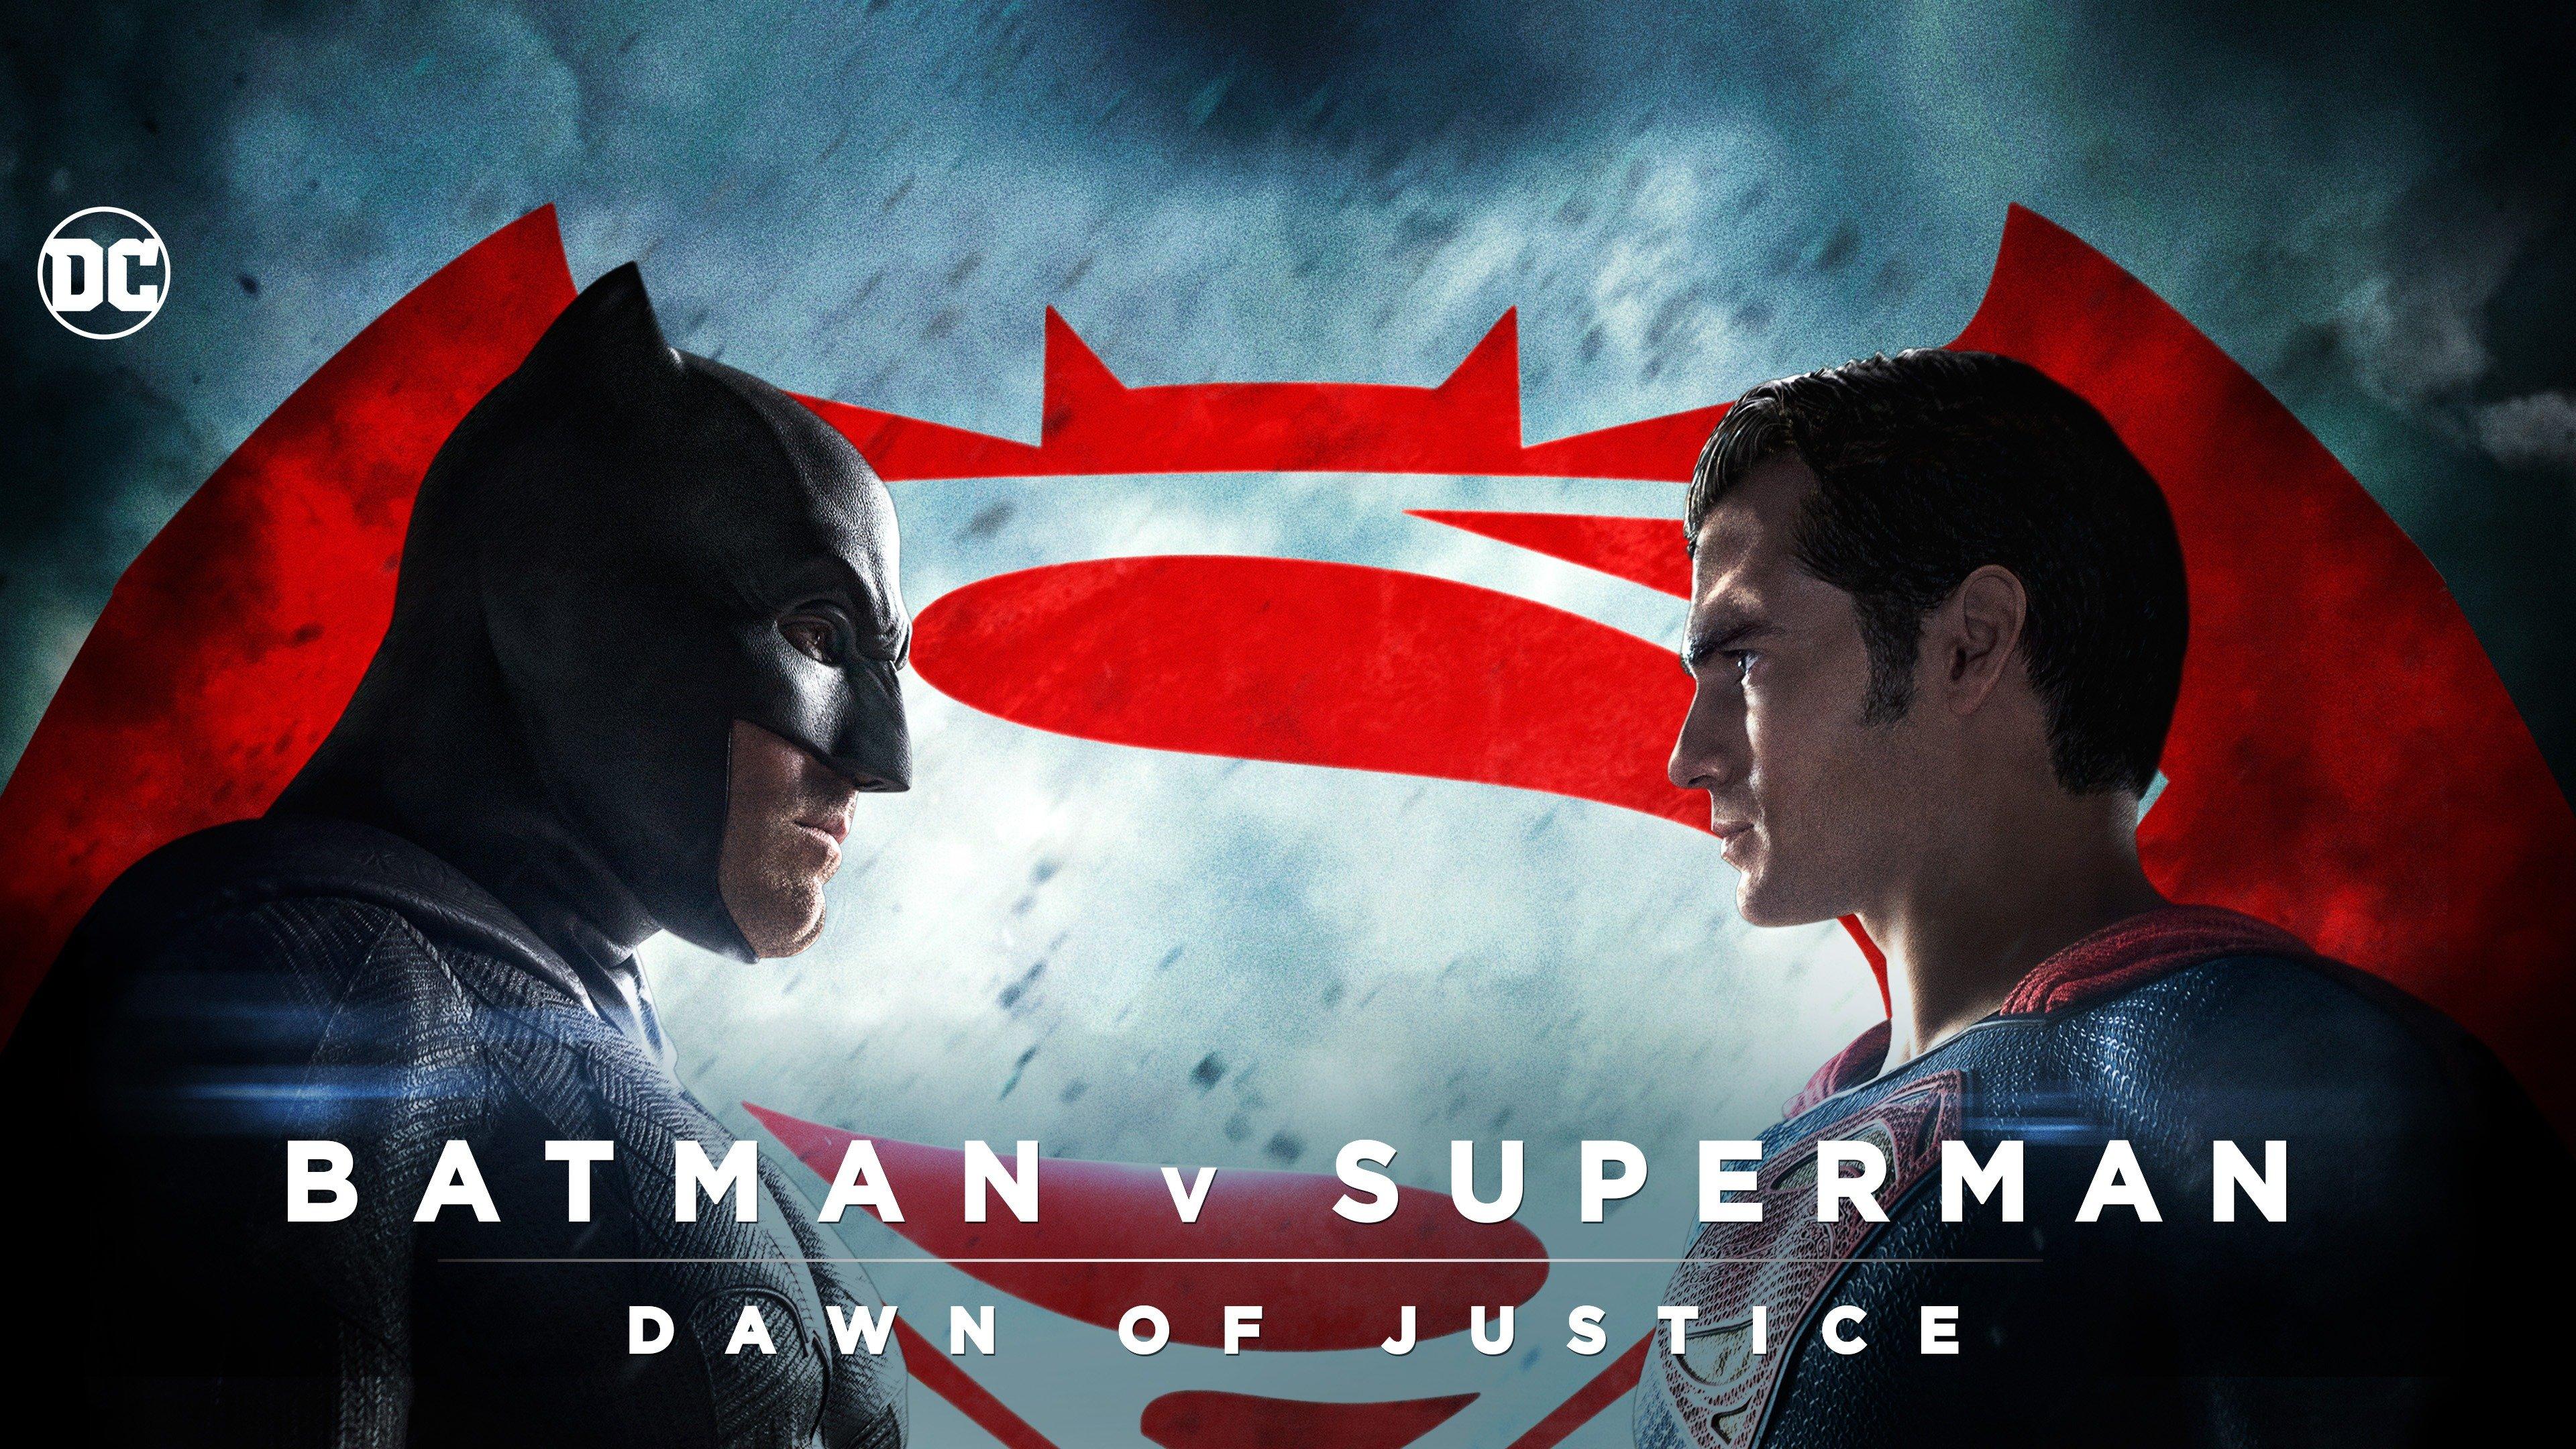 Stream And Watch Batman v Superman: Dawn of Justice Online | Sling TV